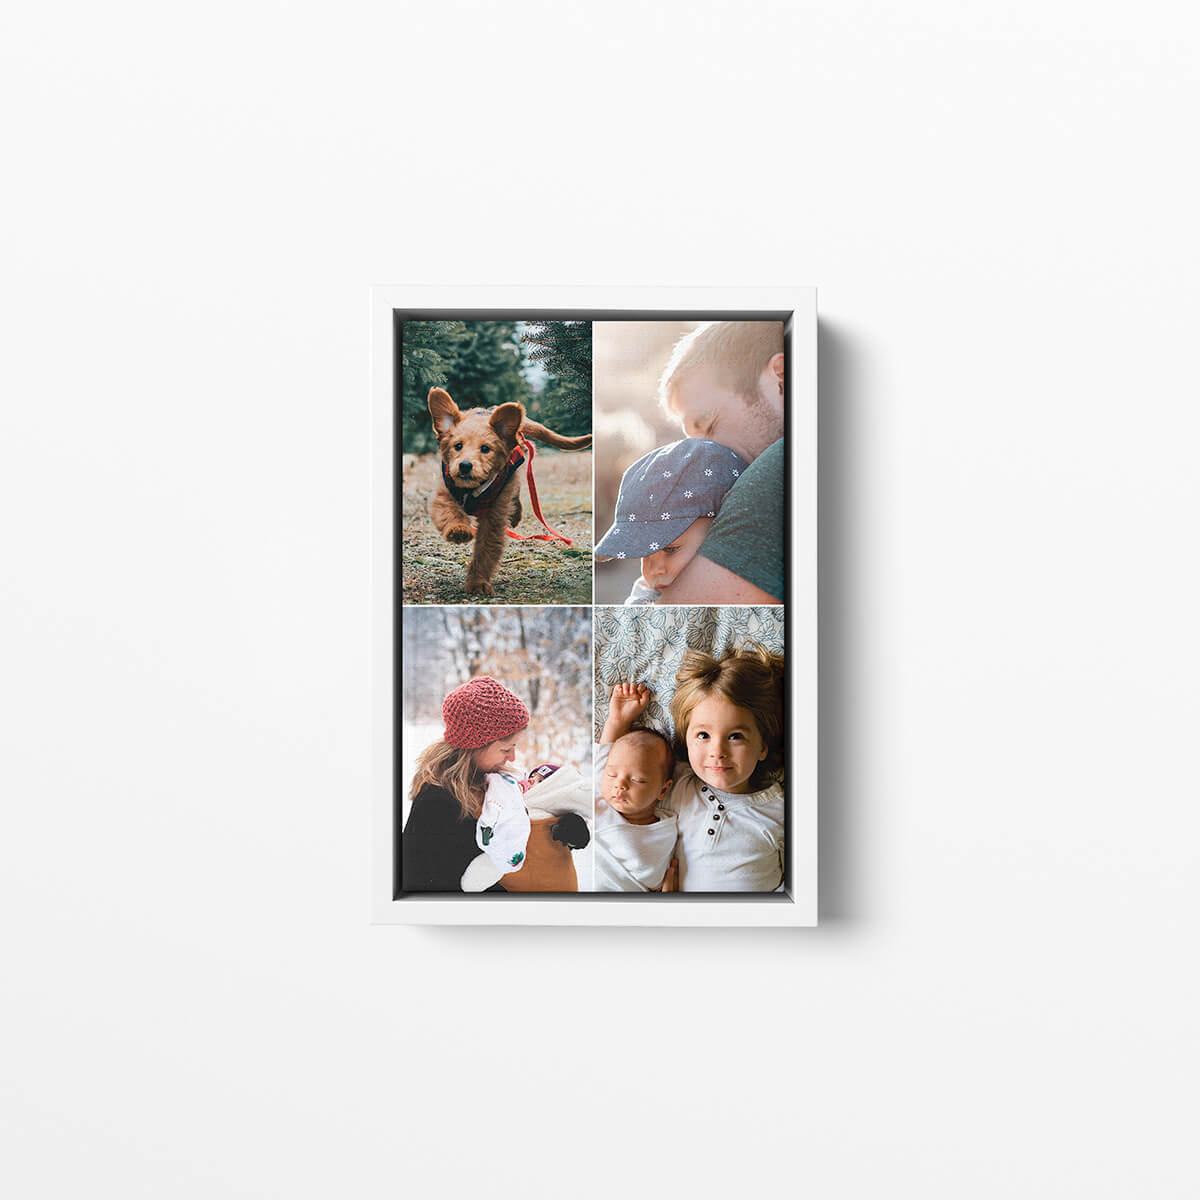 A white framed photo canvas, with a collage photo design